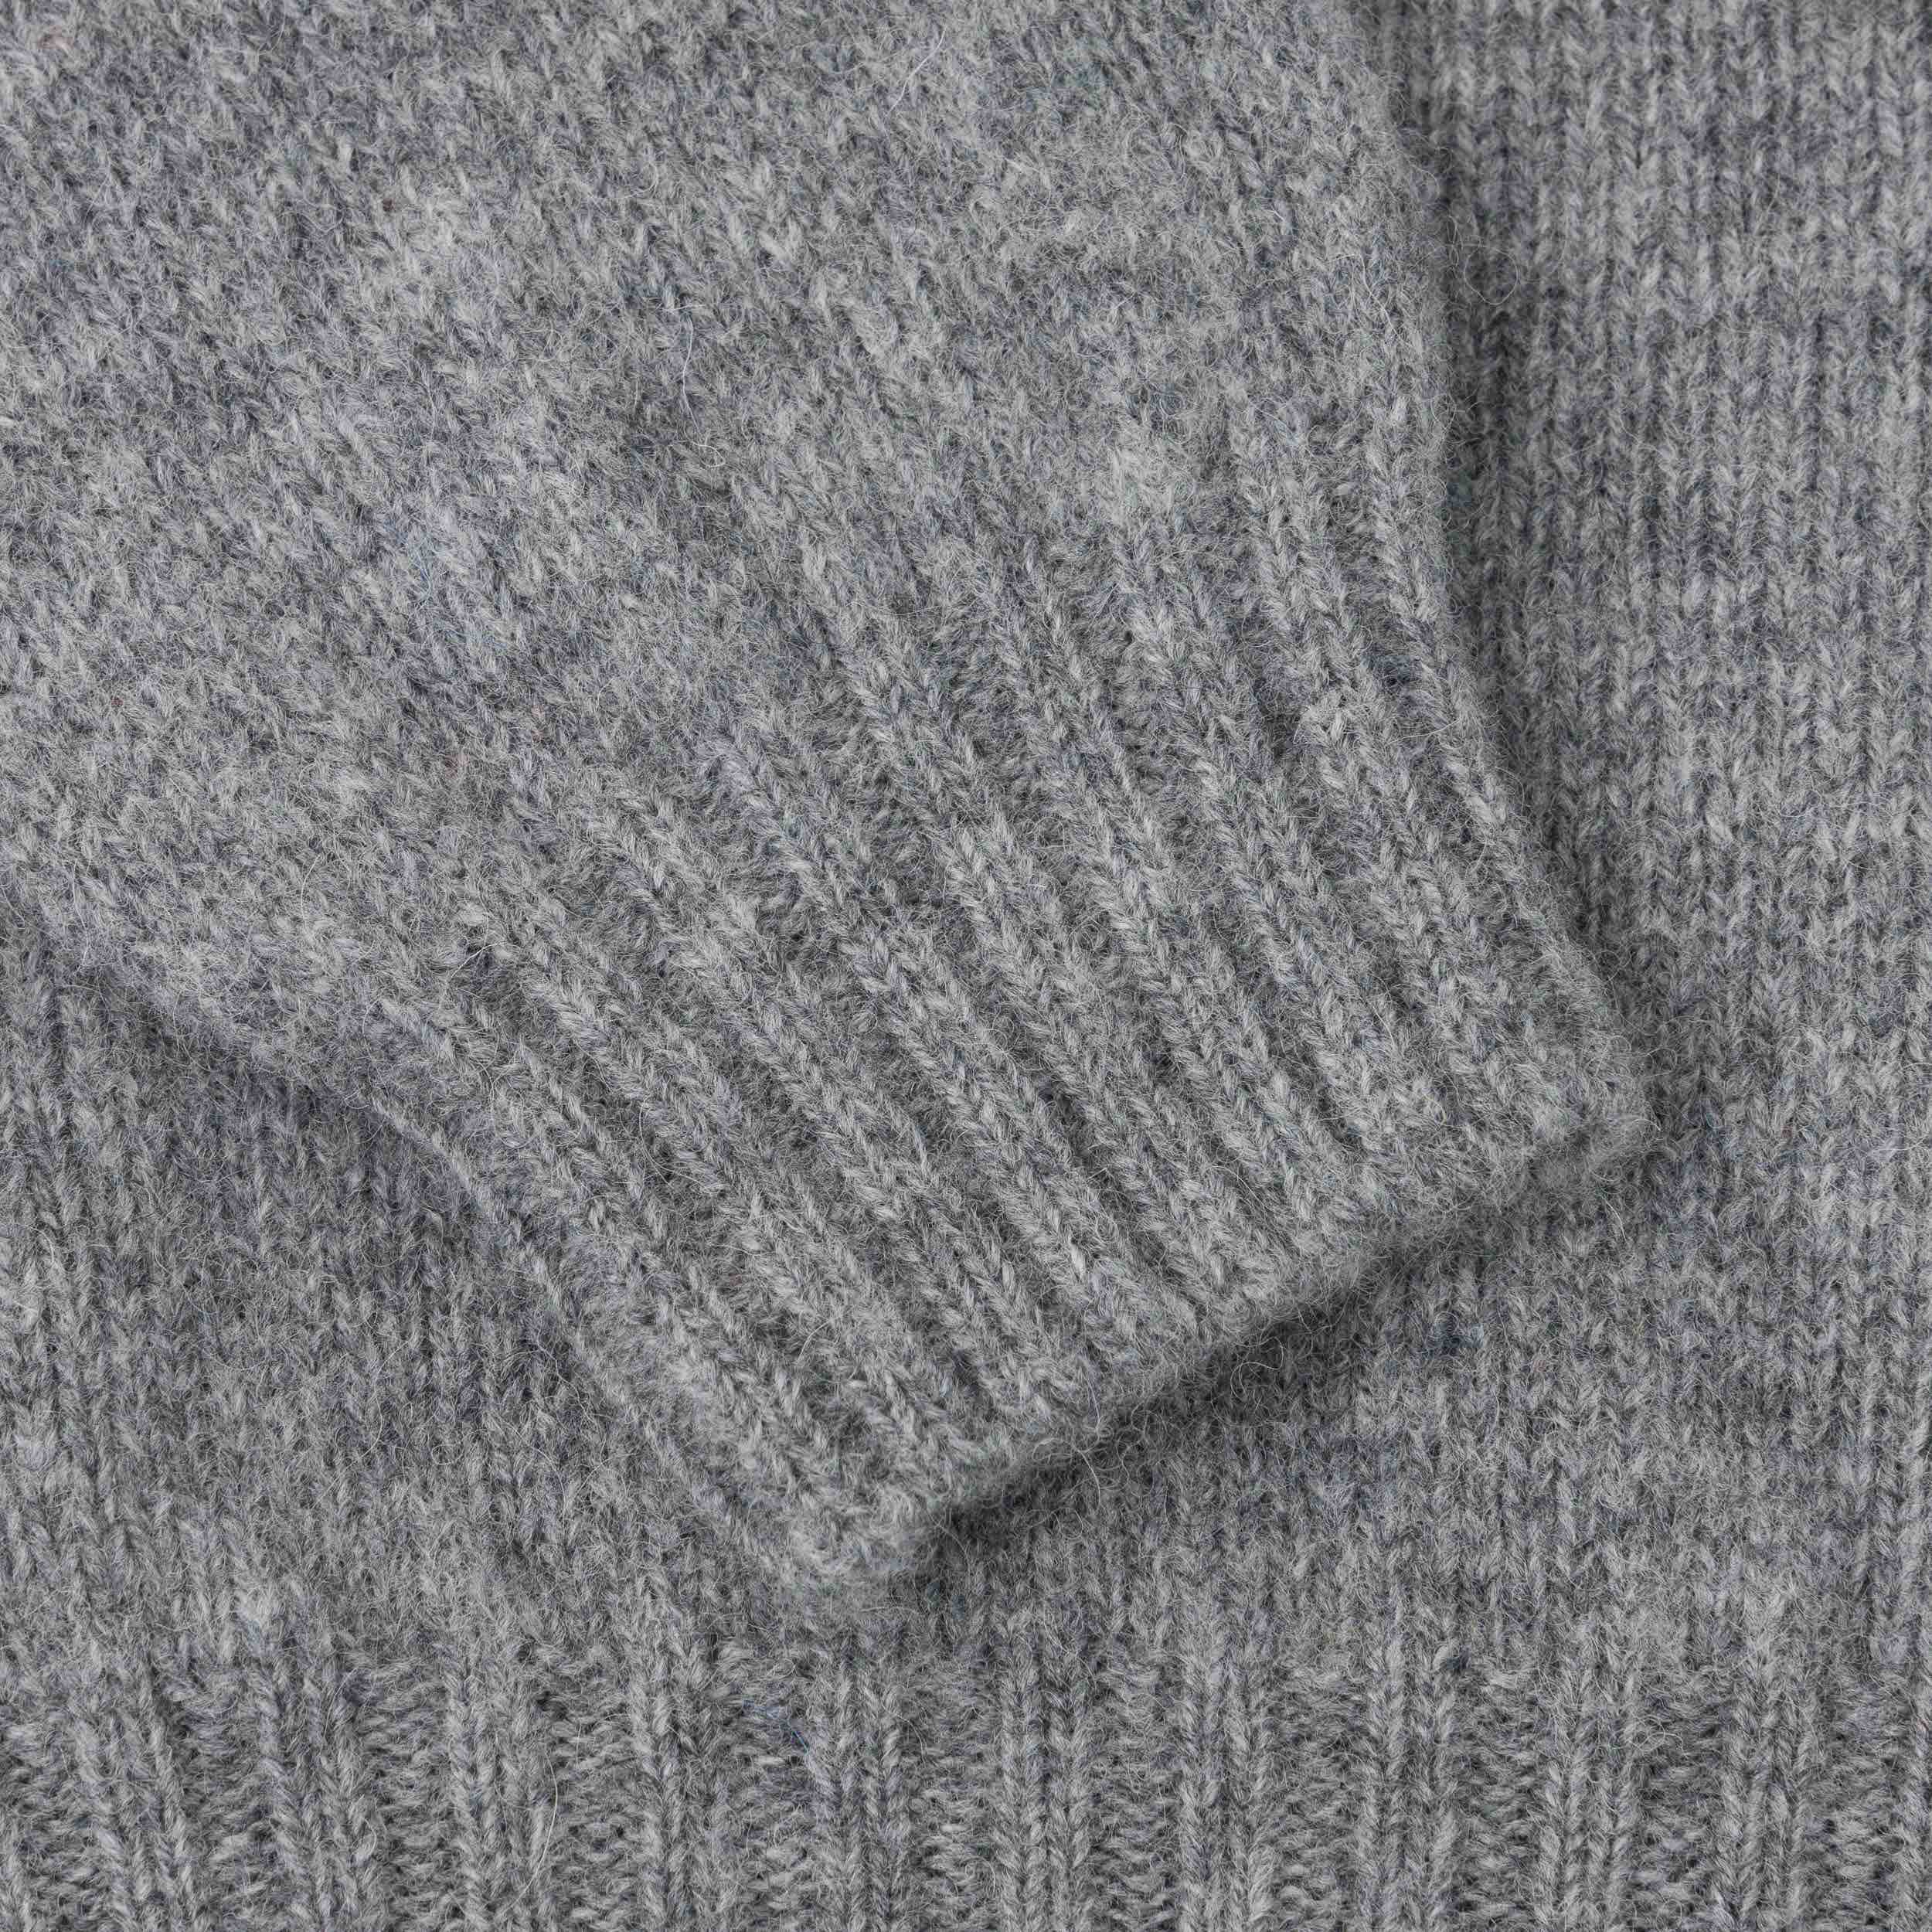 Carrier Company Shetland Lambswool Jumper in Fossil